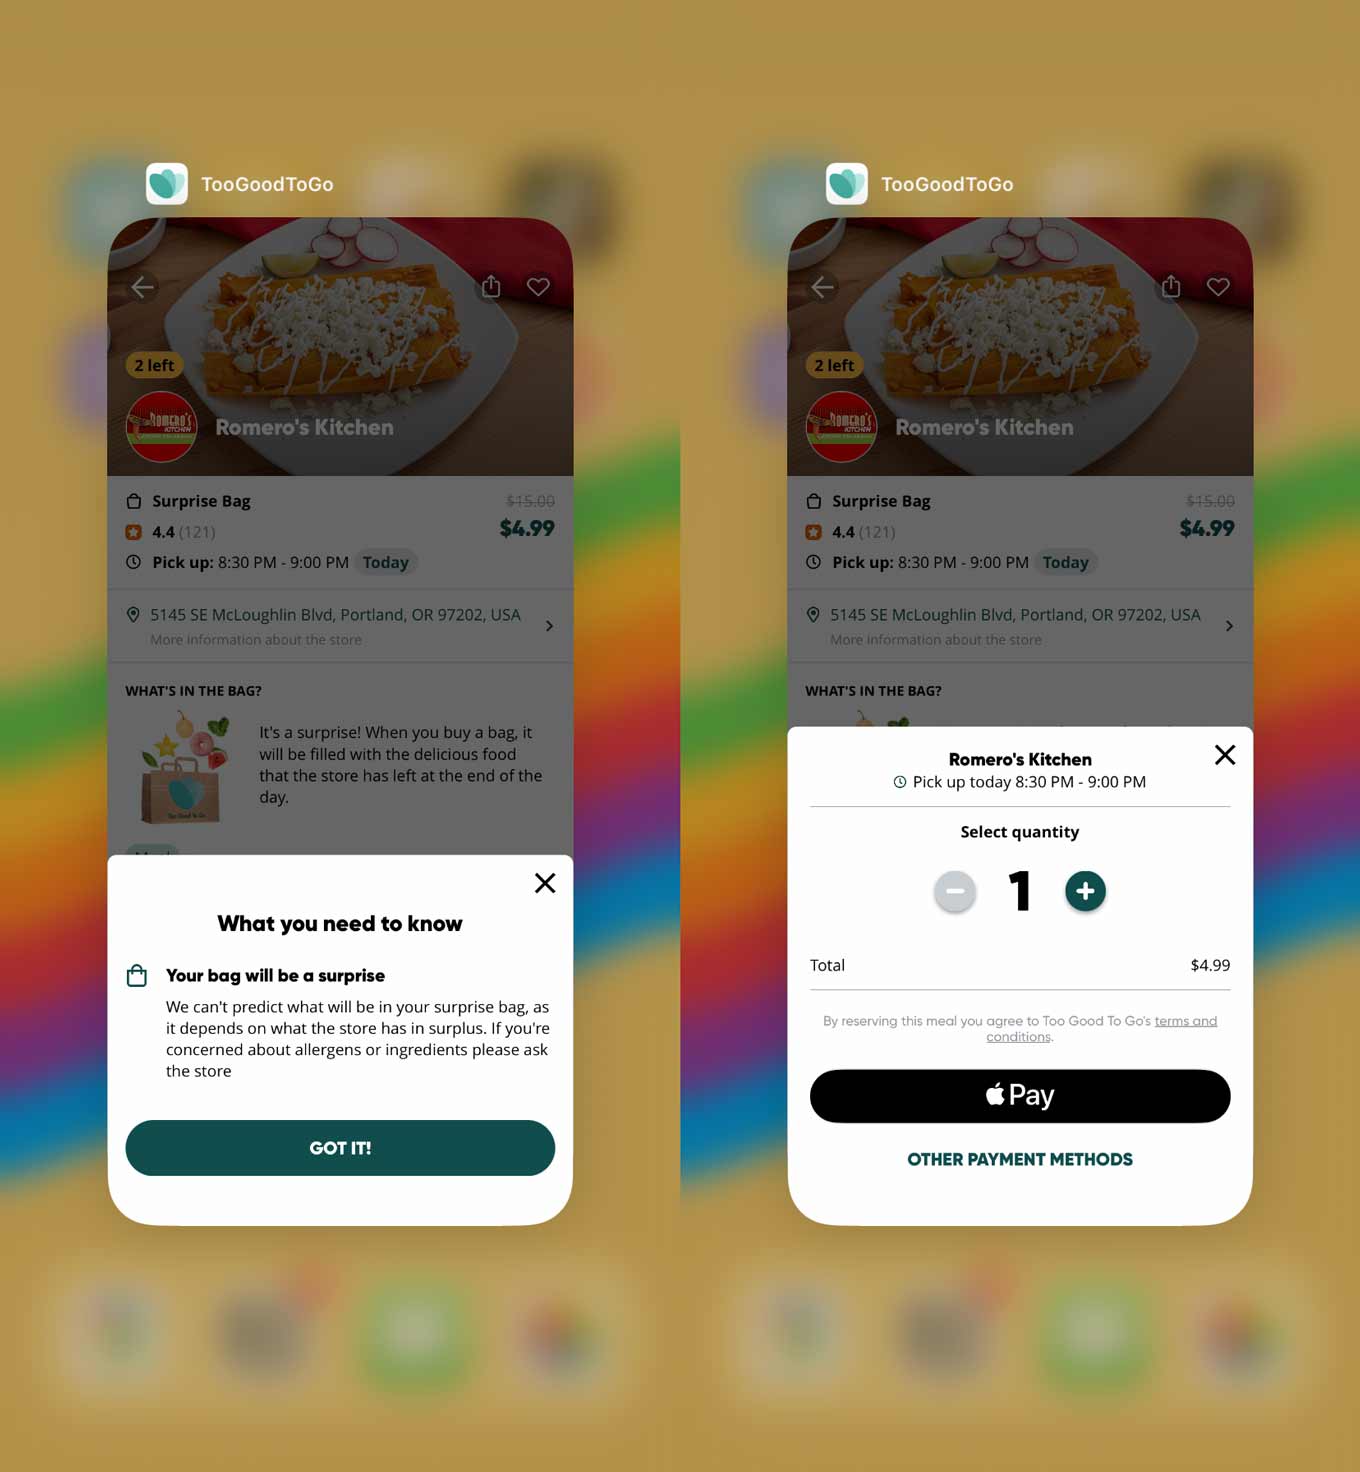 Screenshot of iPhone version of Too Good To Go app showing the checkout process for reserving a Surprise Bag at a local restaurant